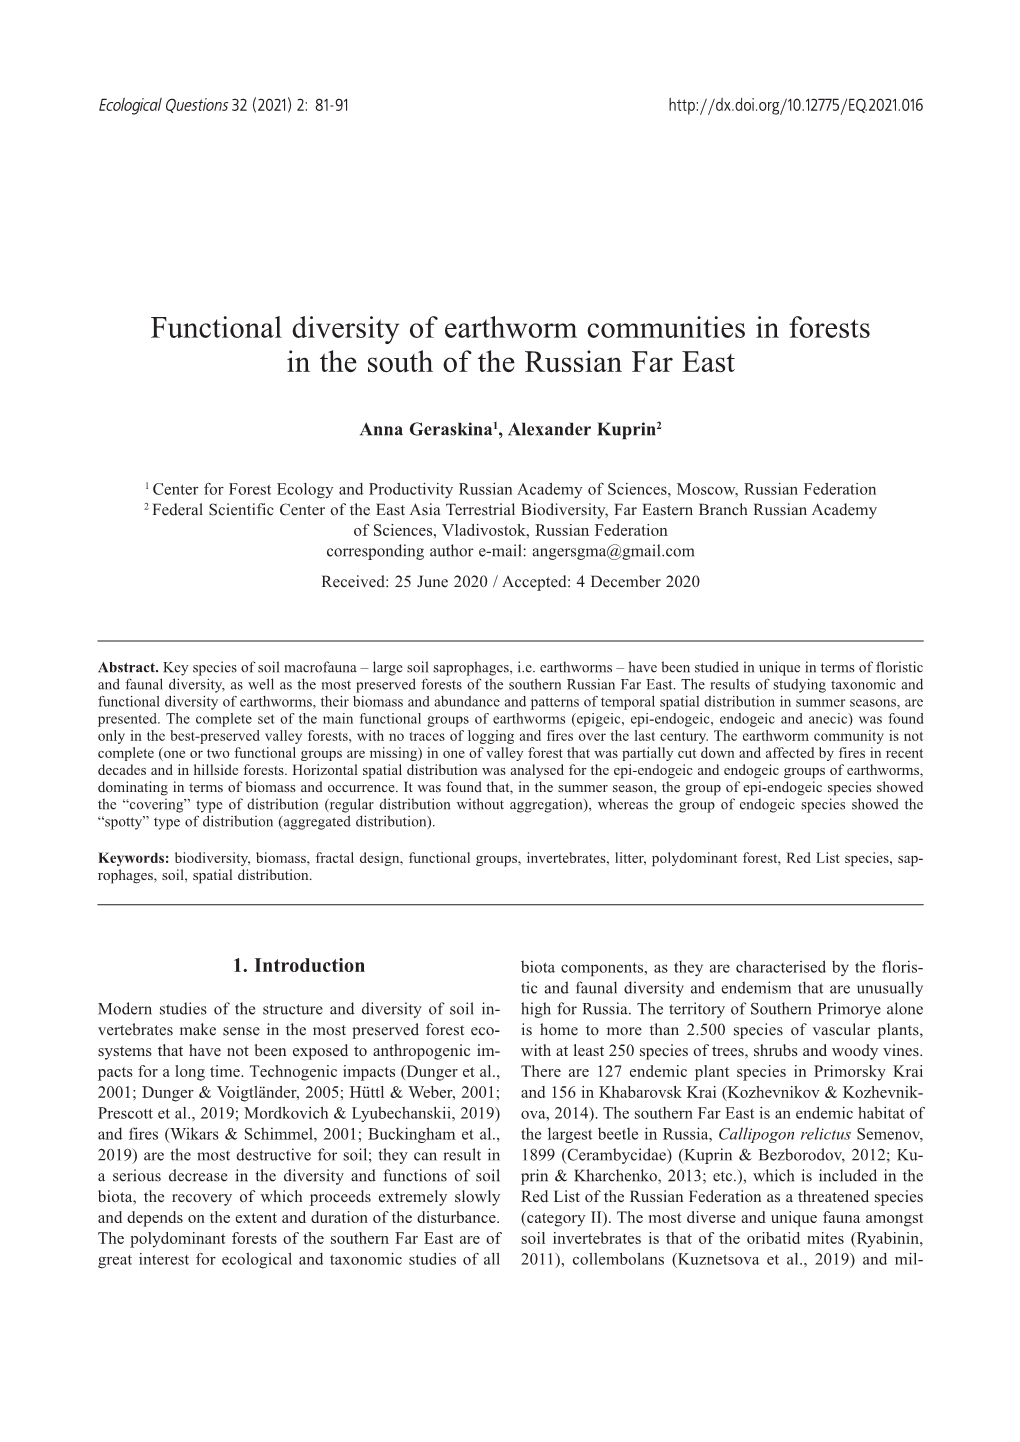 Functional Diversity of Earthworm Communities in Forests in the South of the Russian Far East